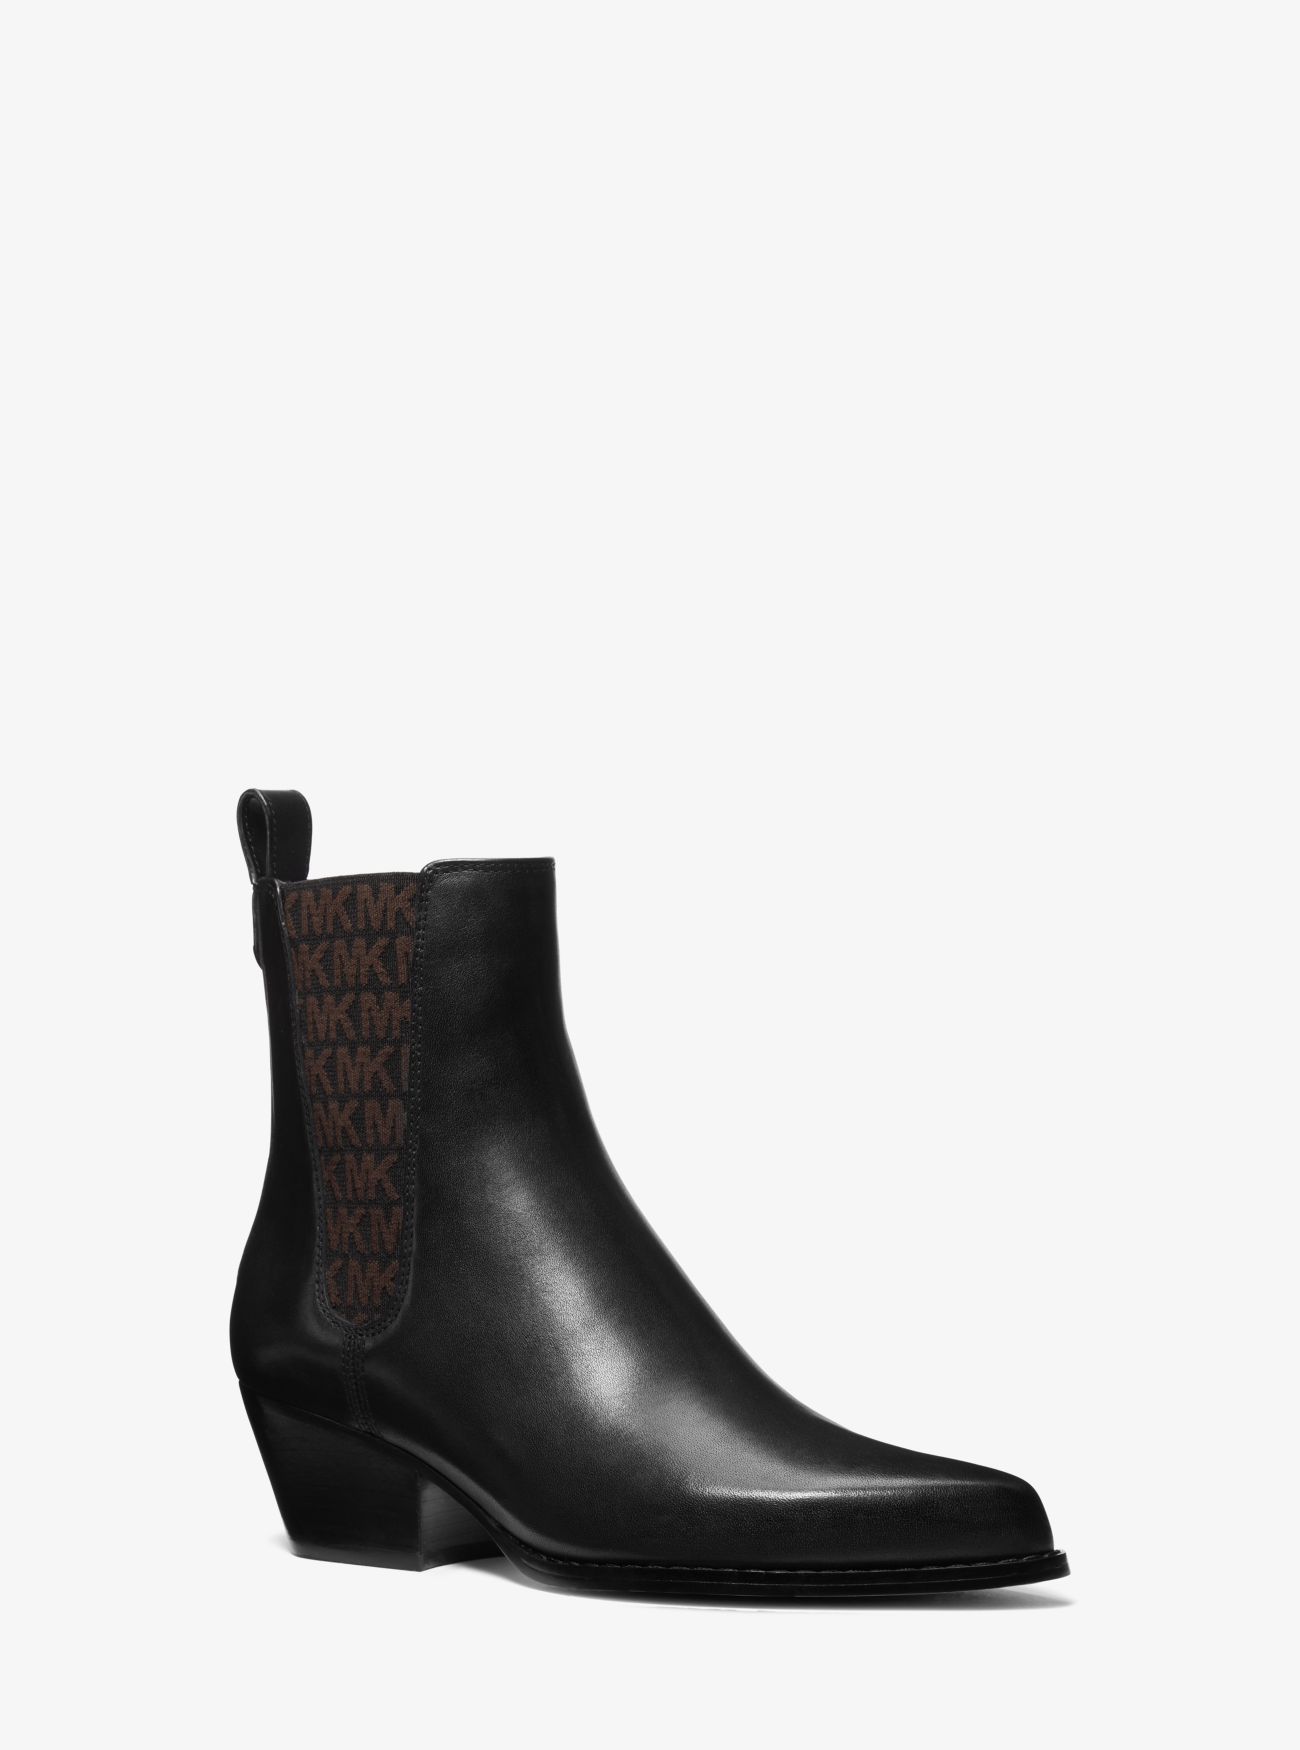 MK Kinlee Leather and Stretch Knit Ankle Boot - Brown - Michael Kors